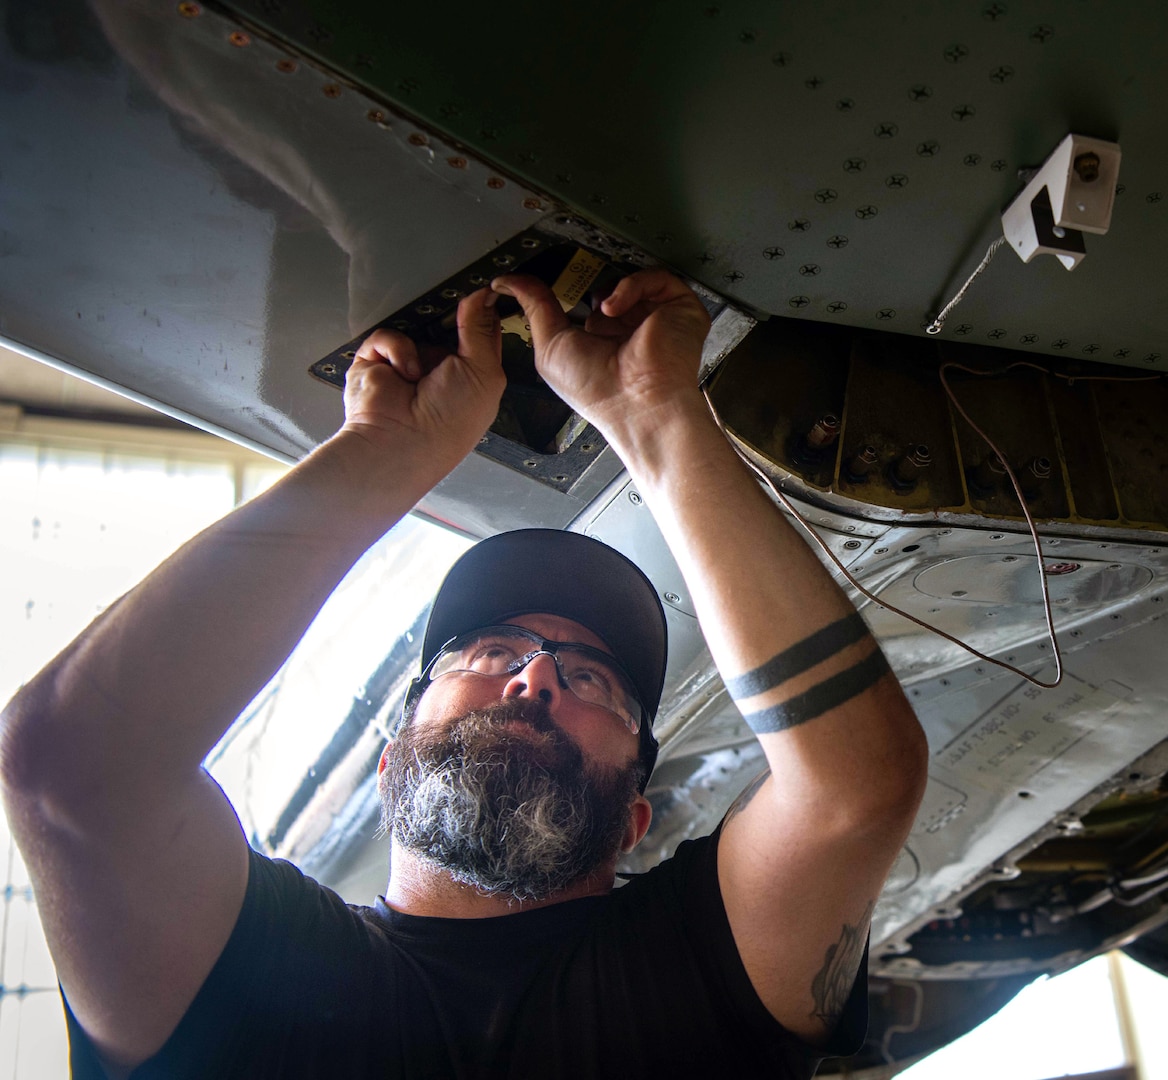 Man working on aircraft